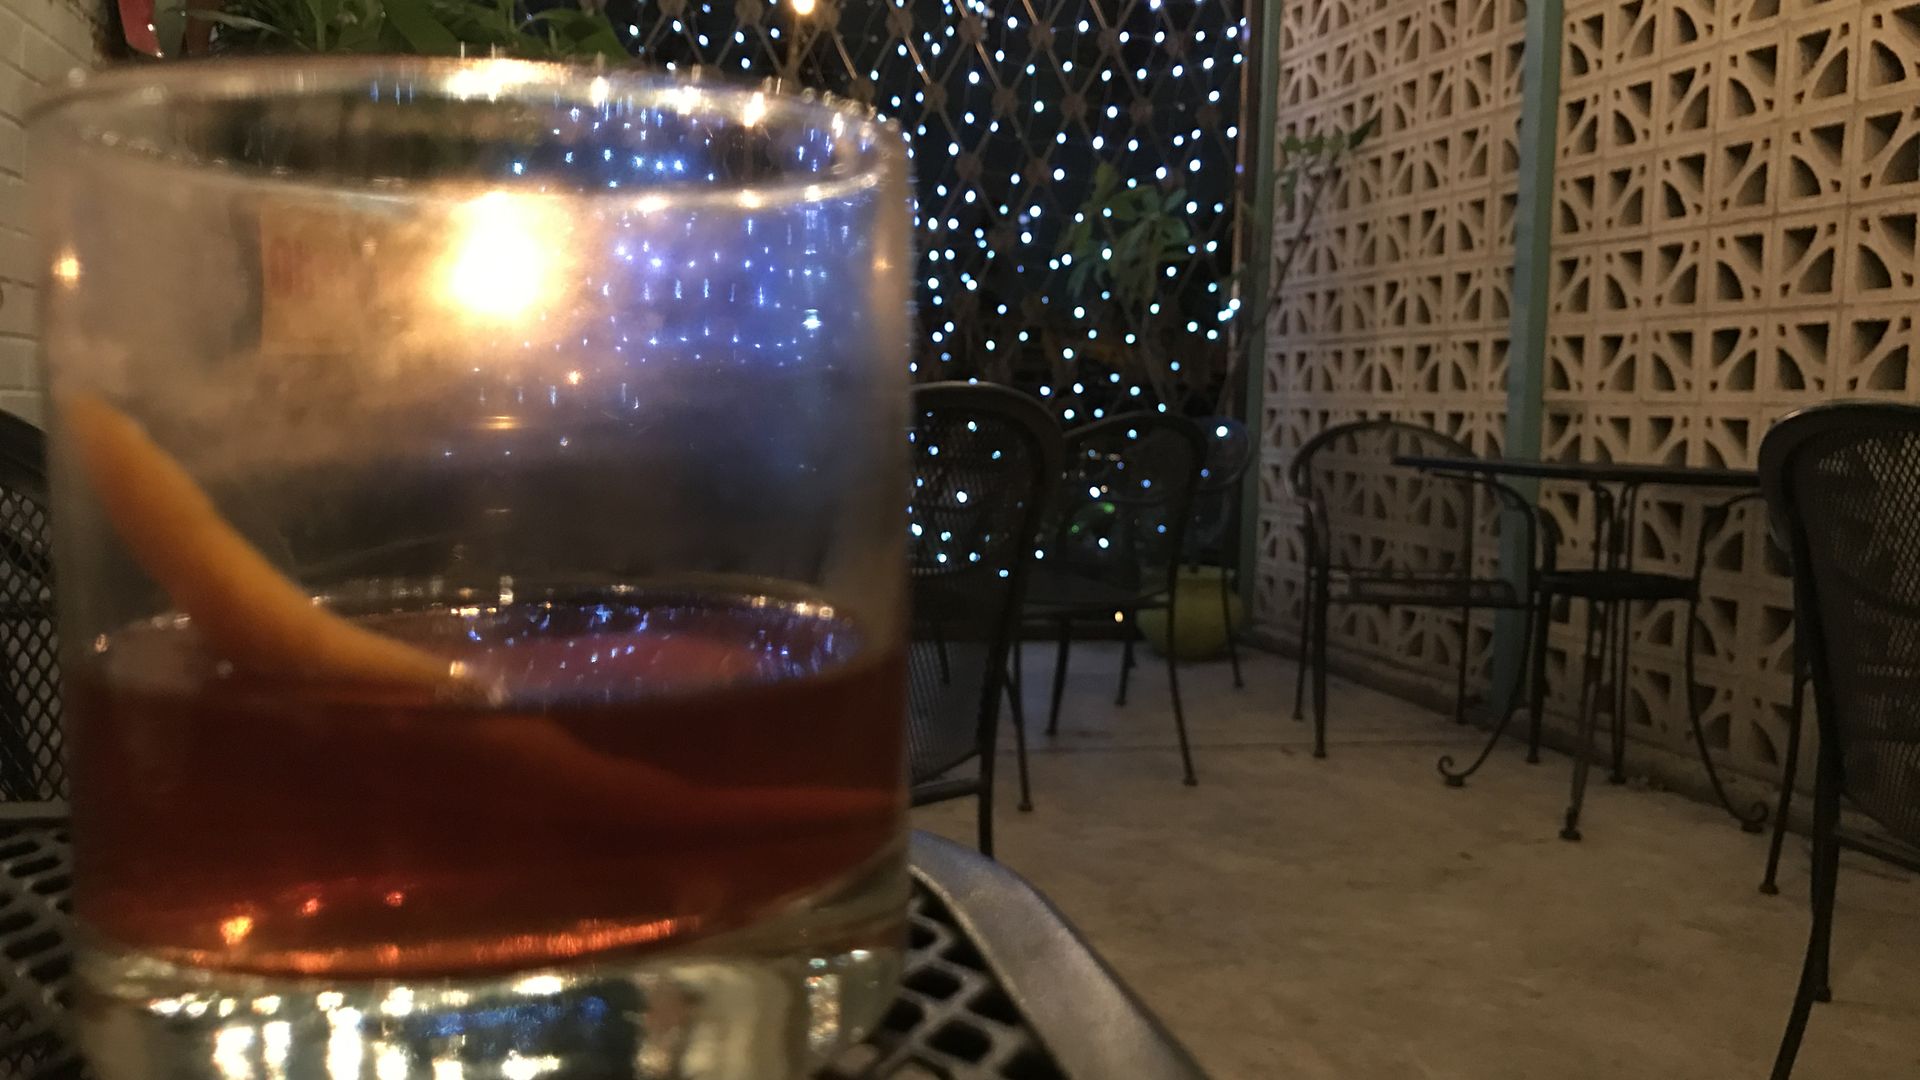 An old fashioned in front of Christmas lights